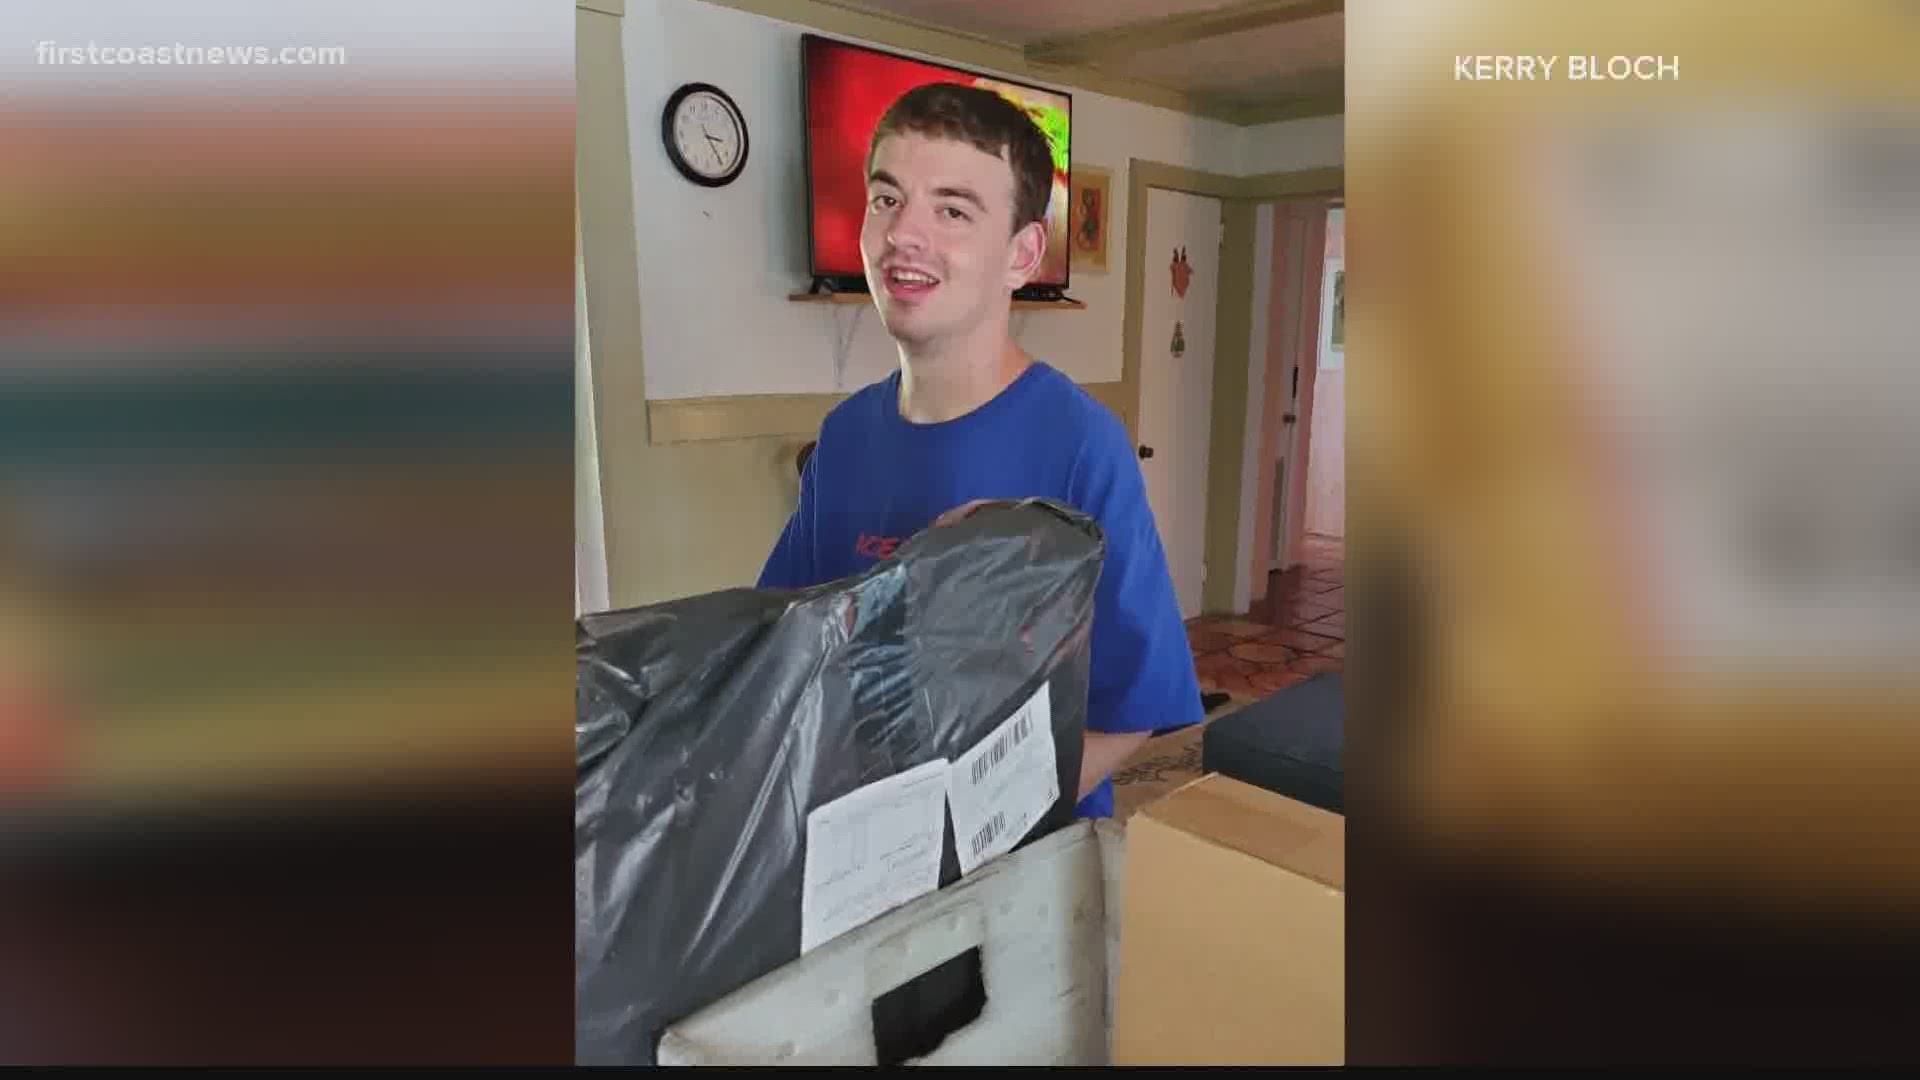 Last year, 21-year-old David Bloch asked his 1st question: "Would someone like me?" Now he's receiving birthday cards from around the country.